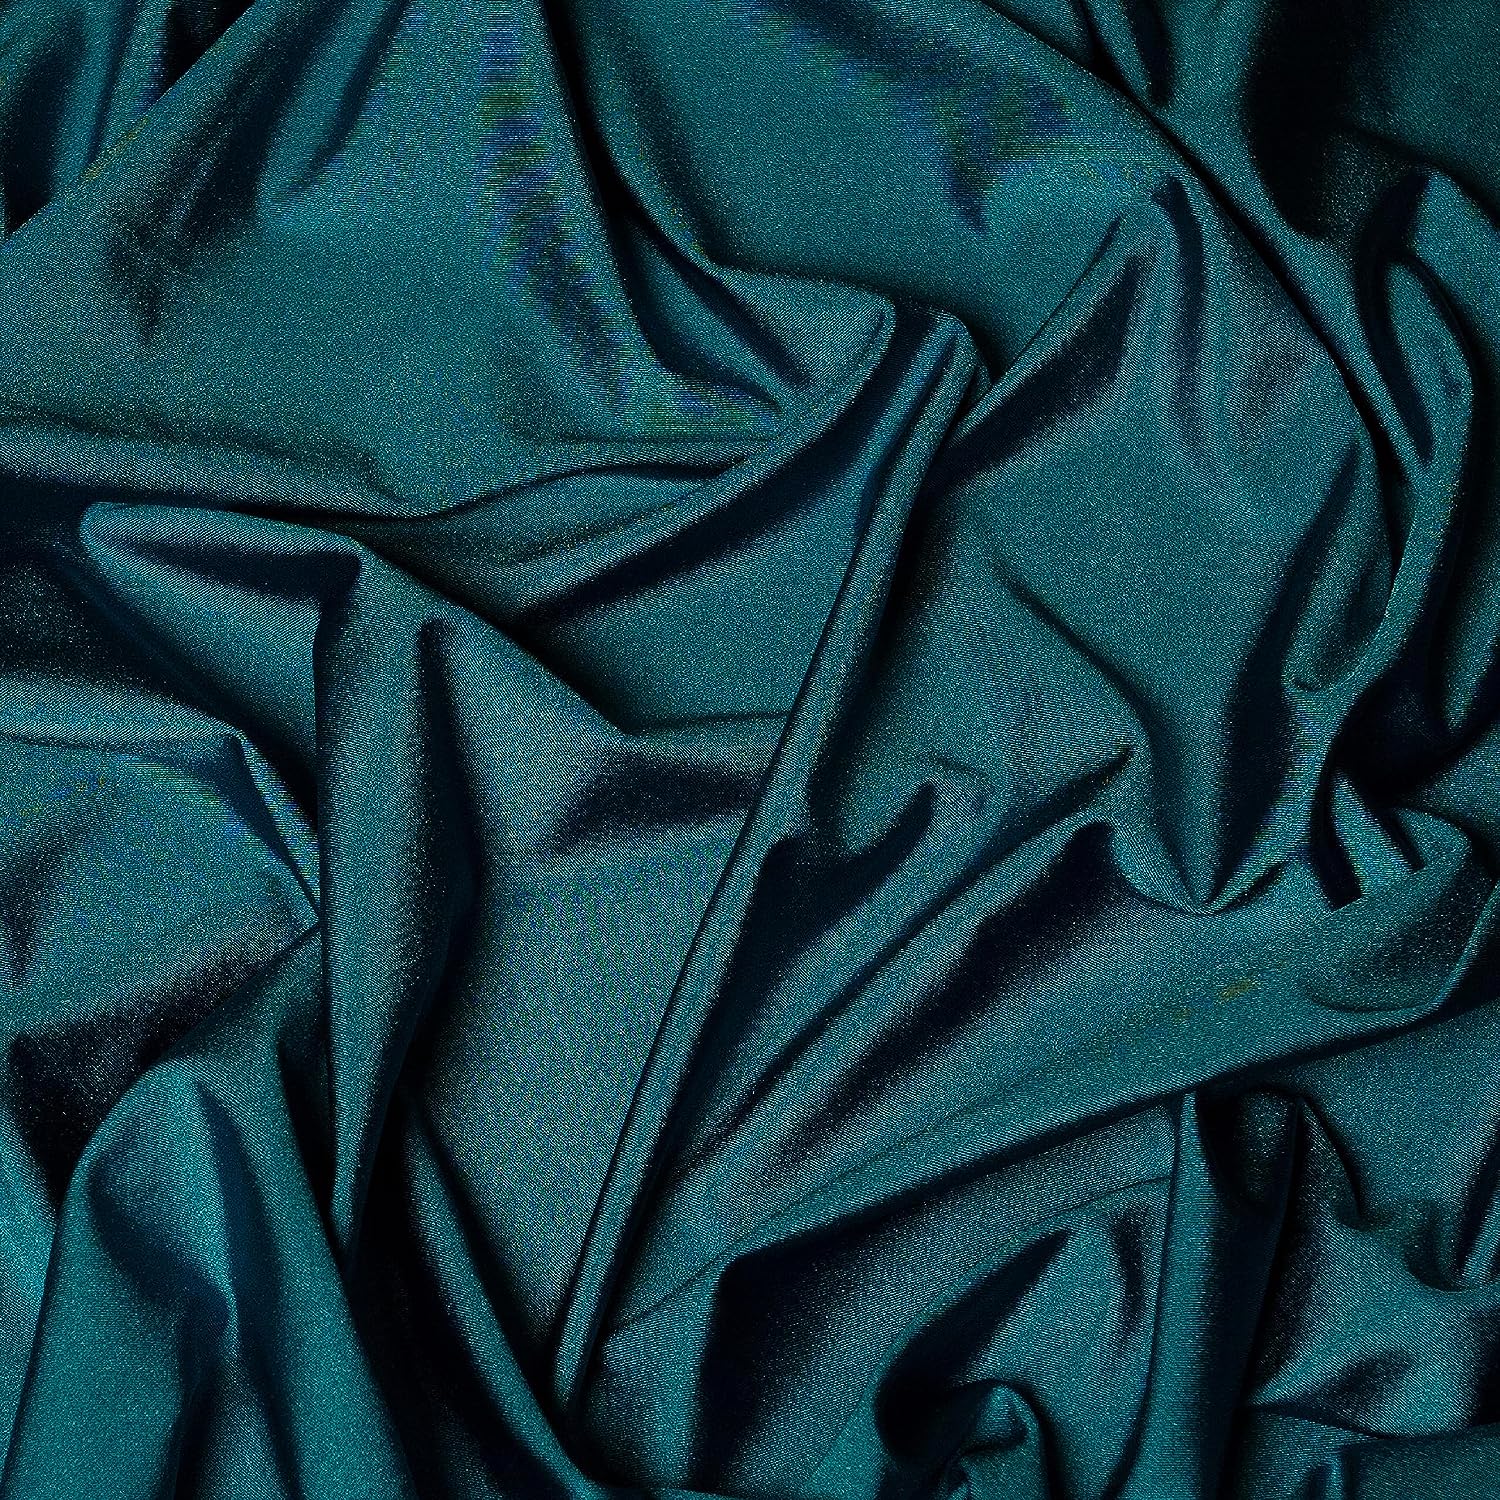 Teal Luxury Nylon Spandex Fabric By The YardICE FABRICSICE FABRICSBy The Yard (60" Width)Teal Luxury Nylon Spandex Fabric By The Yard ICE FABRICS